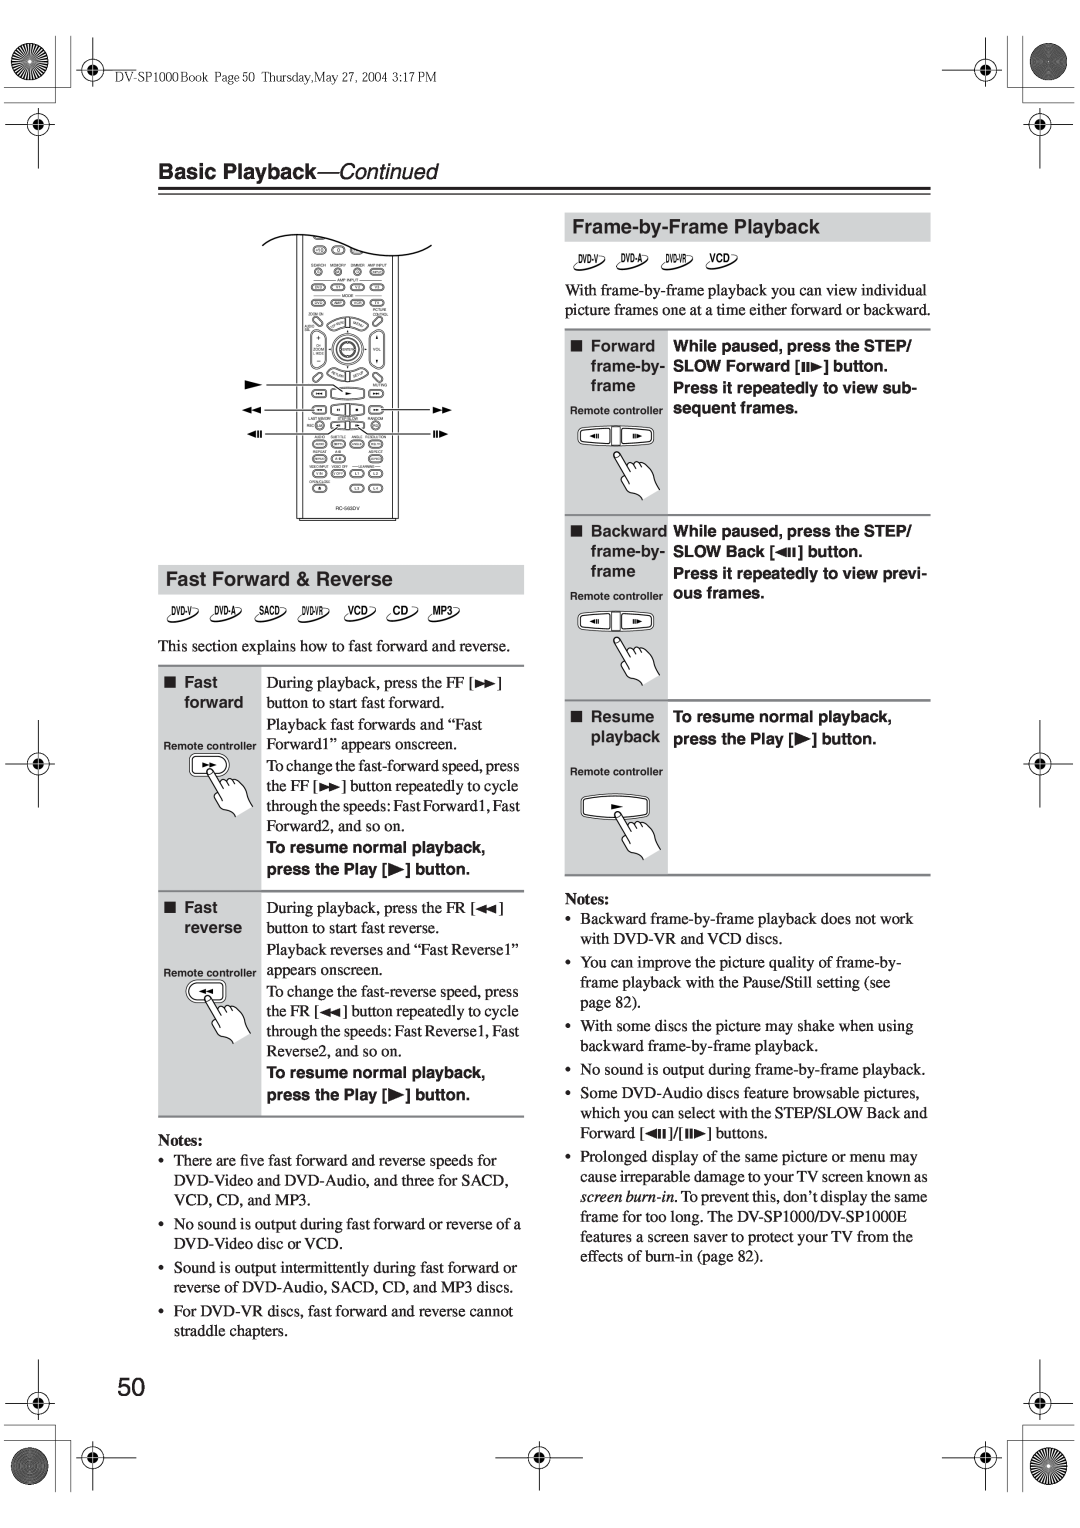 Onkyo DV-SP1000E instruction manual Frame-by-FramePlayback, Fast Forward & Reverse, Basic Playback—Continued, Notes 